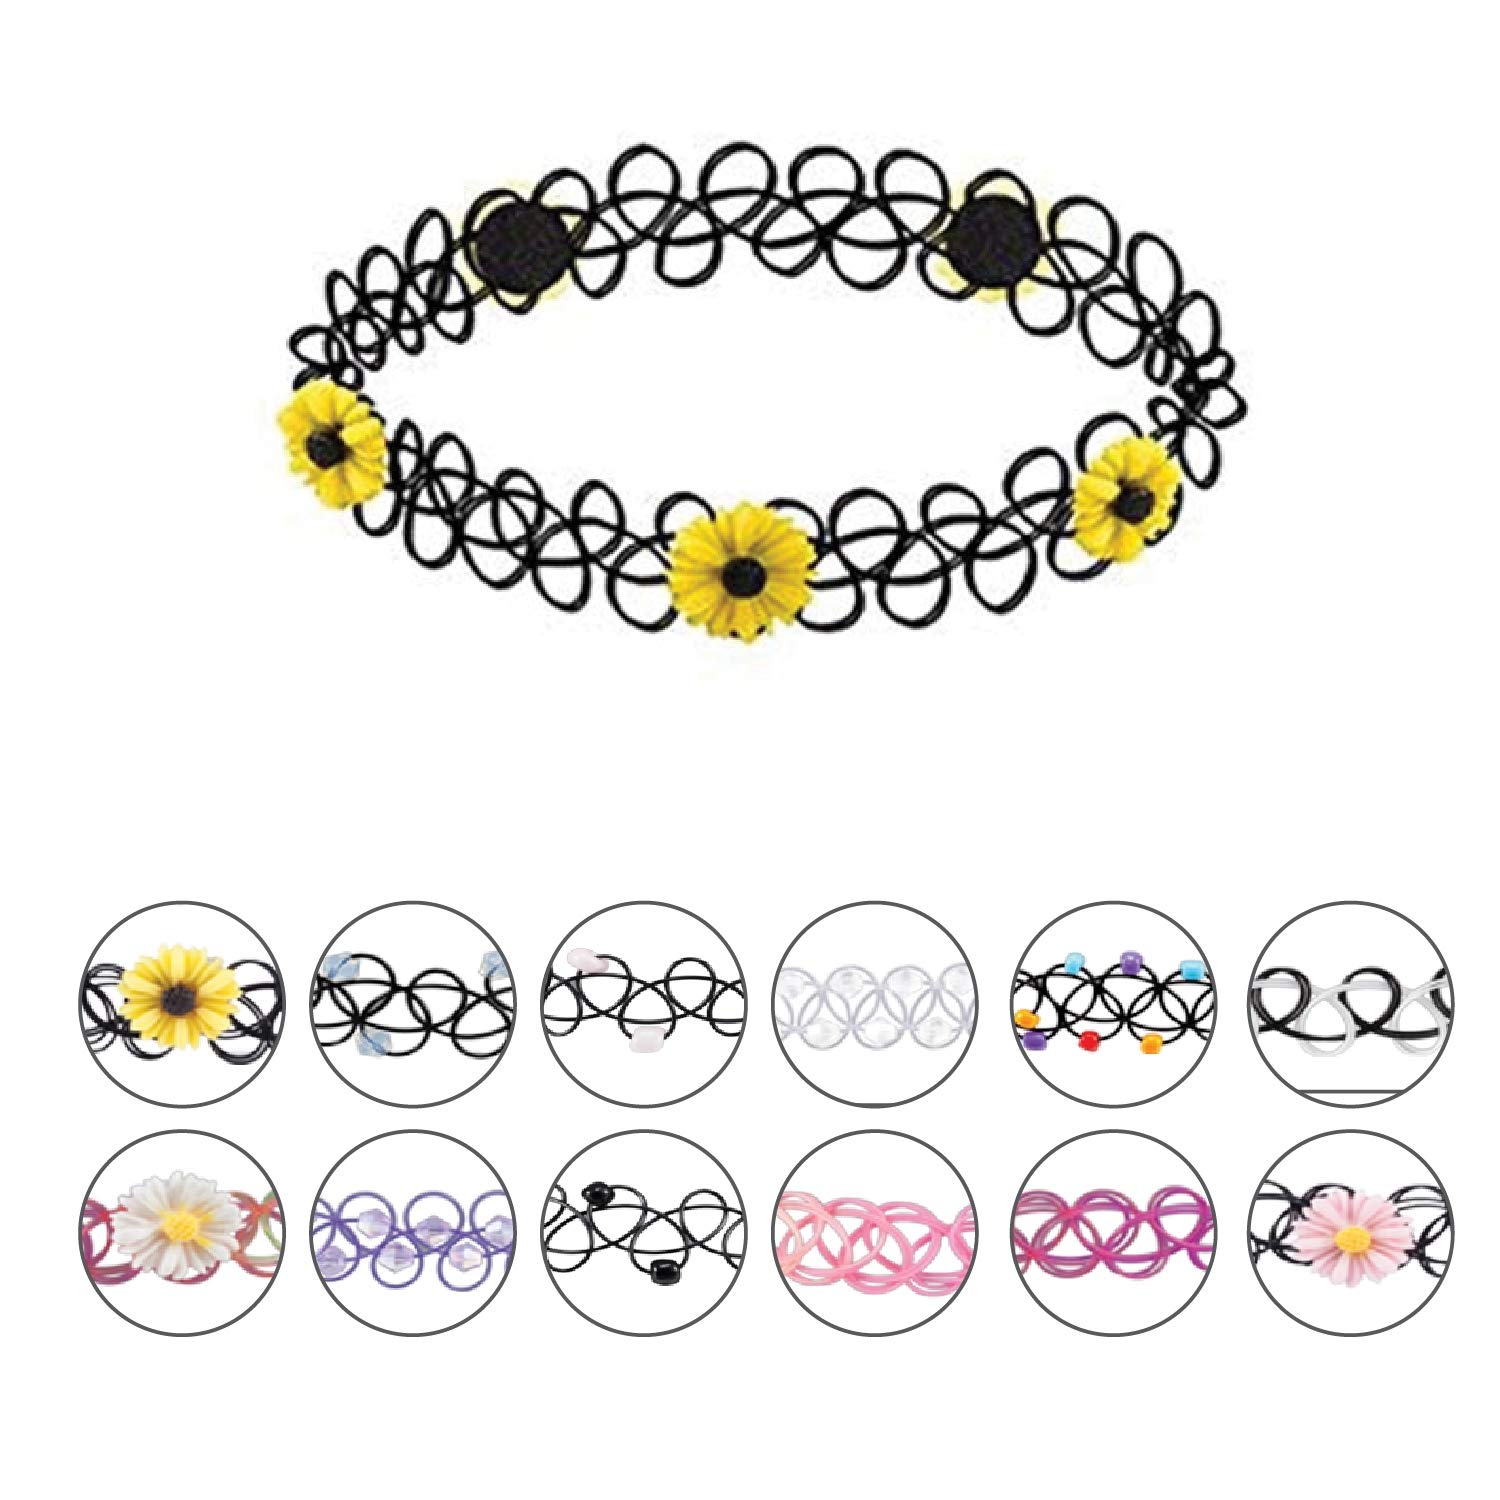 BodyJ4You 24PC Tattoo Choker Necklace Set - 90s Accessories Women Teen Girls Kids - Flower Charms Rainbow Multicolor Stretchy Jewelry - Summer Style Gift Idea